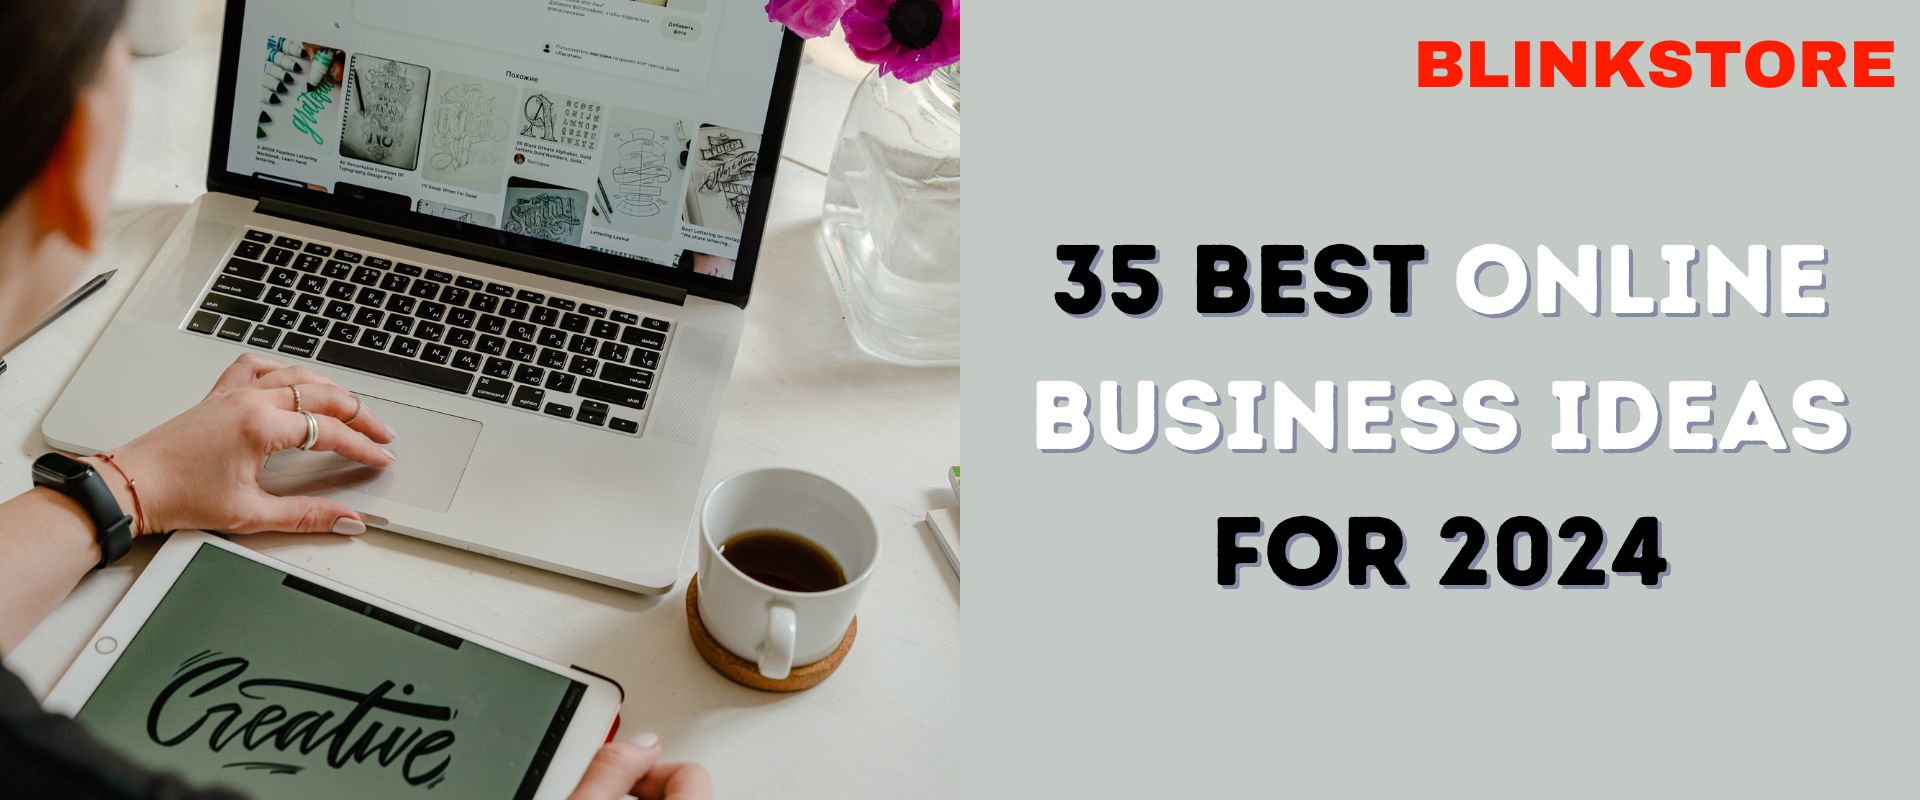 35 Best Online Business Ideas for 2024